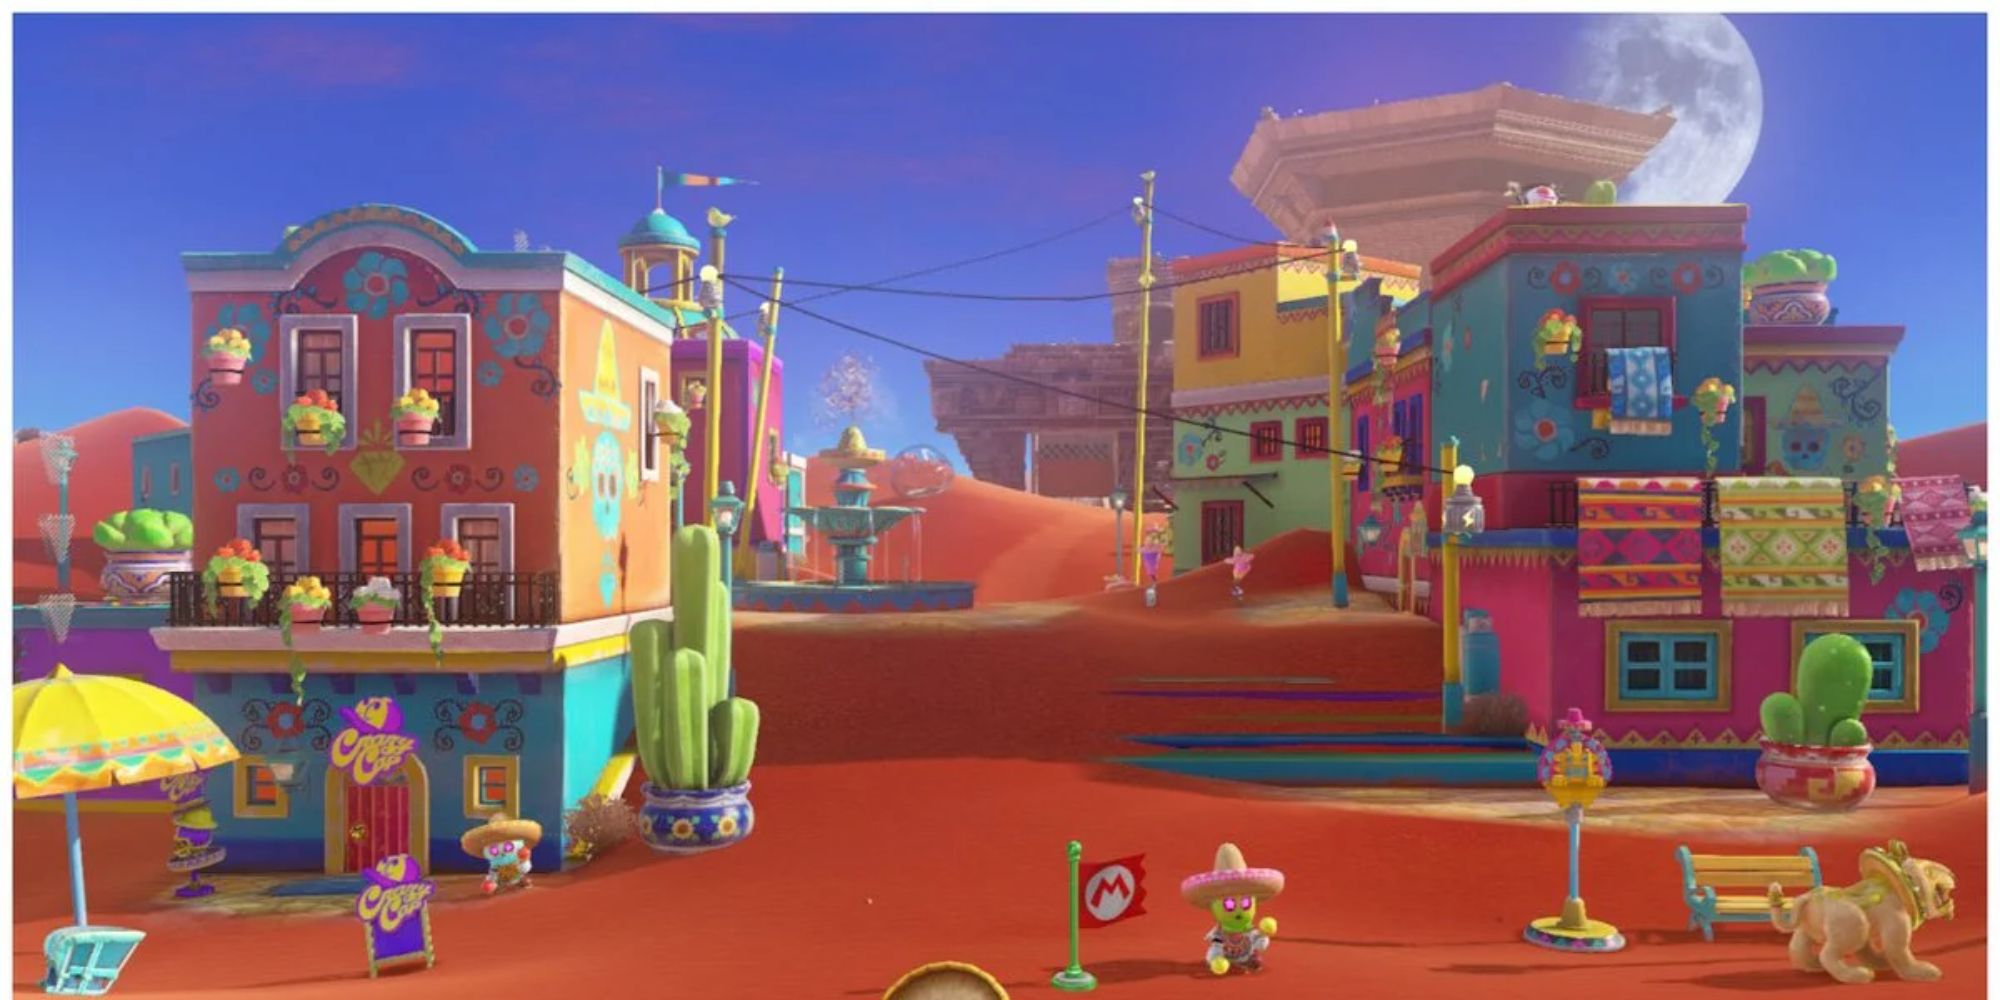 The entrance to Tostarena in Mario Odyssey